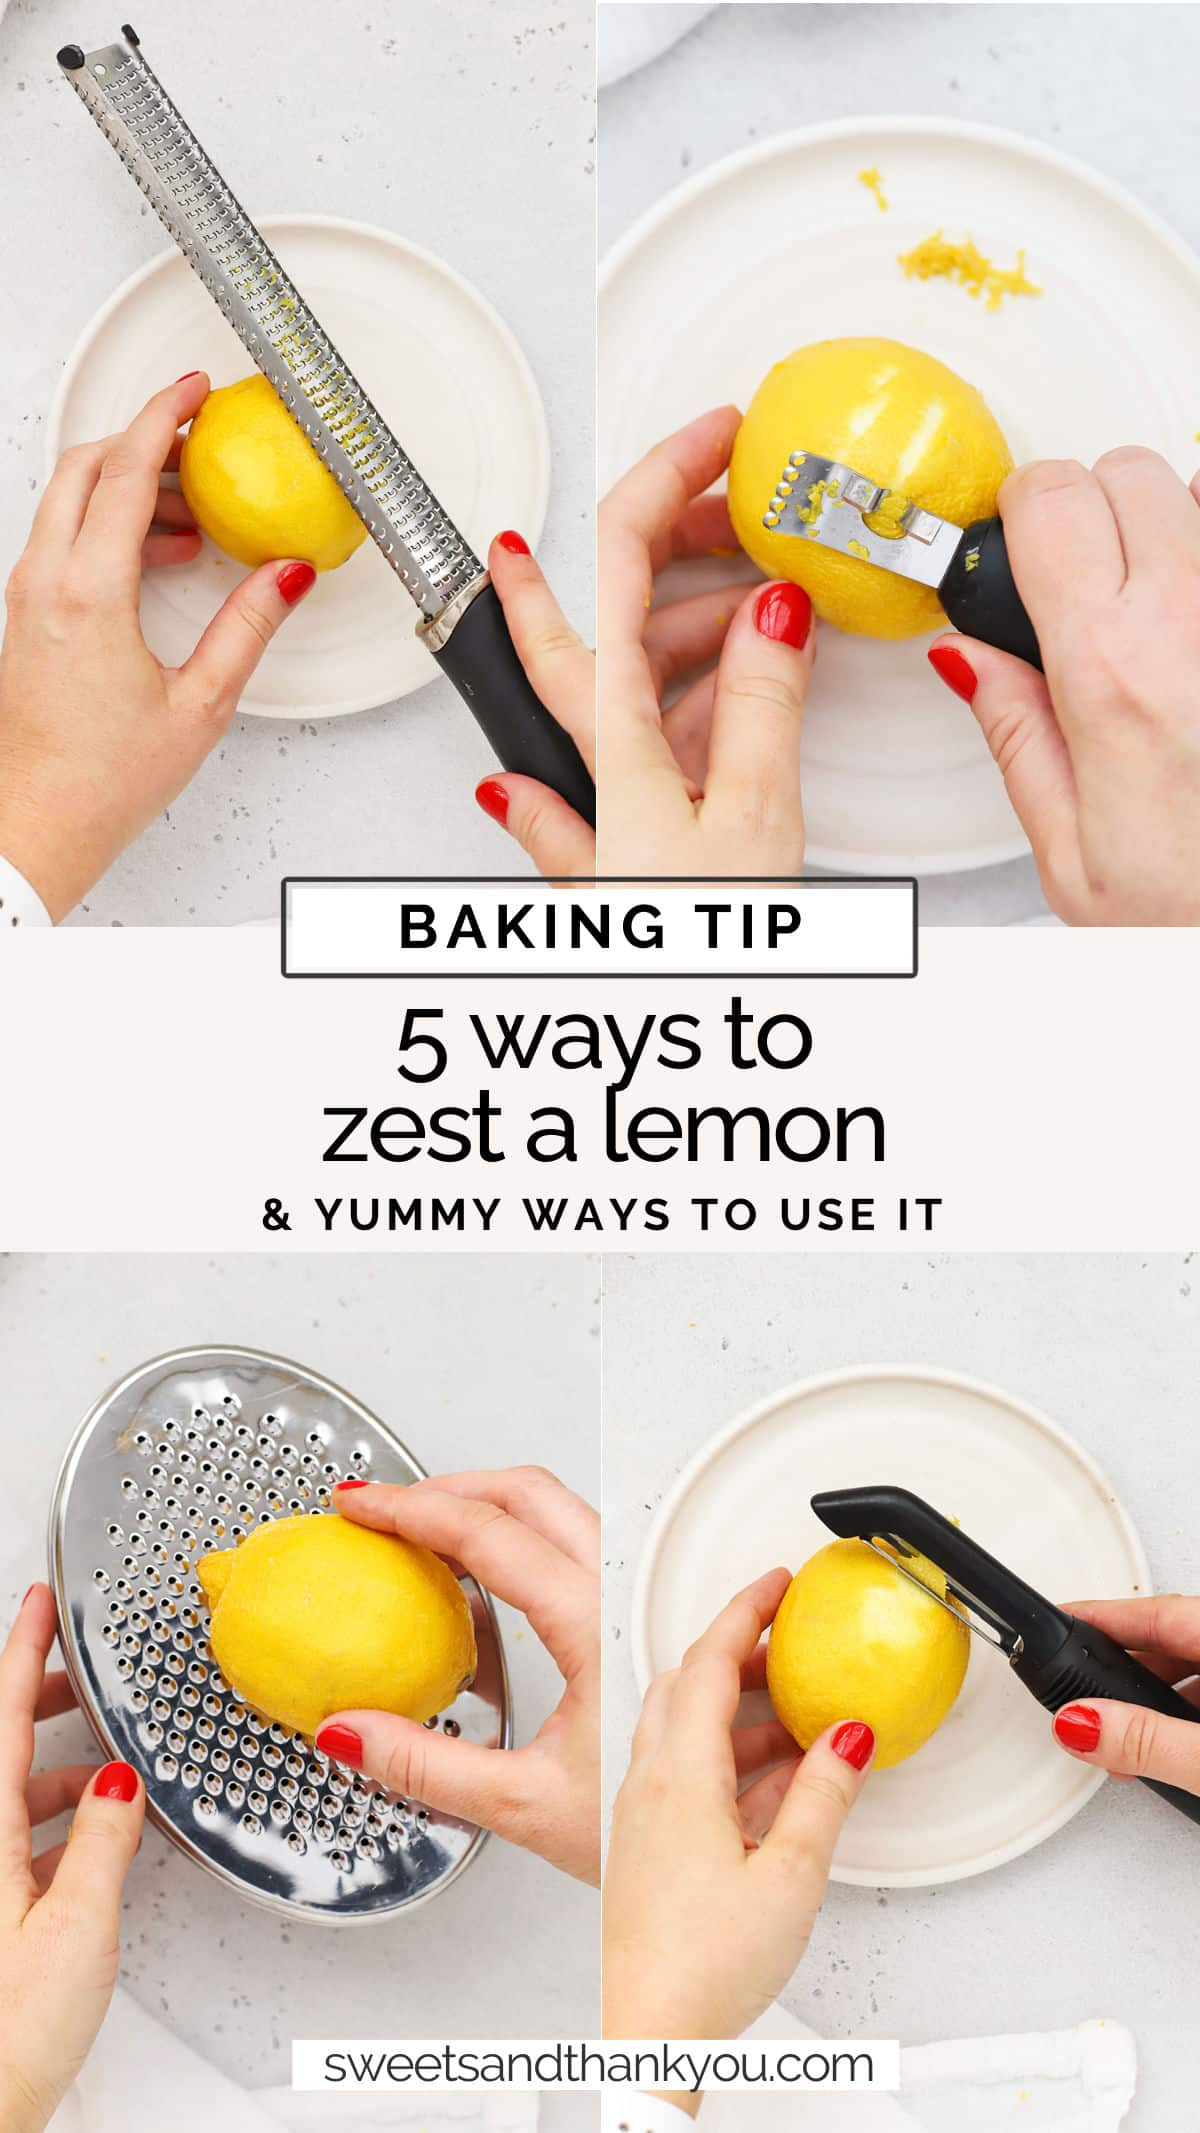 Need a little lemon zest for a recipe? We'll teach you everything you need to know about how to zest a lemon!  Learn how to zest a lemon 5 ways to add a lovely lemon twist to your next recipe! / how to zest a lemon without a microplane / how to zest a lemon with a box grater / how to zest a lemon with a knife / how to zest a lemon with a vegetable peeler / how much zest is in a lemon / how much lemon zest from one lemon / can you freeze lemon zest / what part of the lemon is the zest